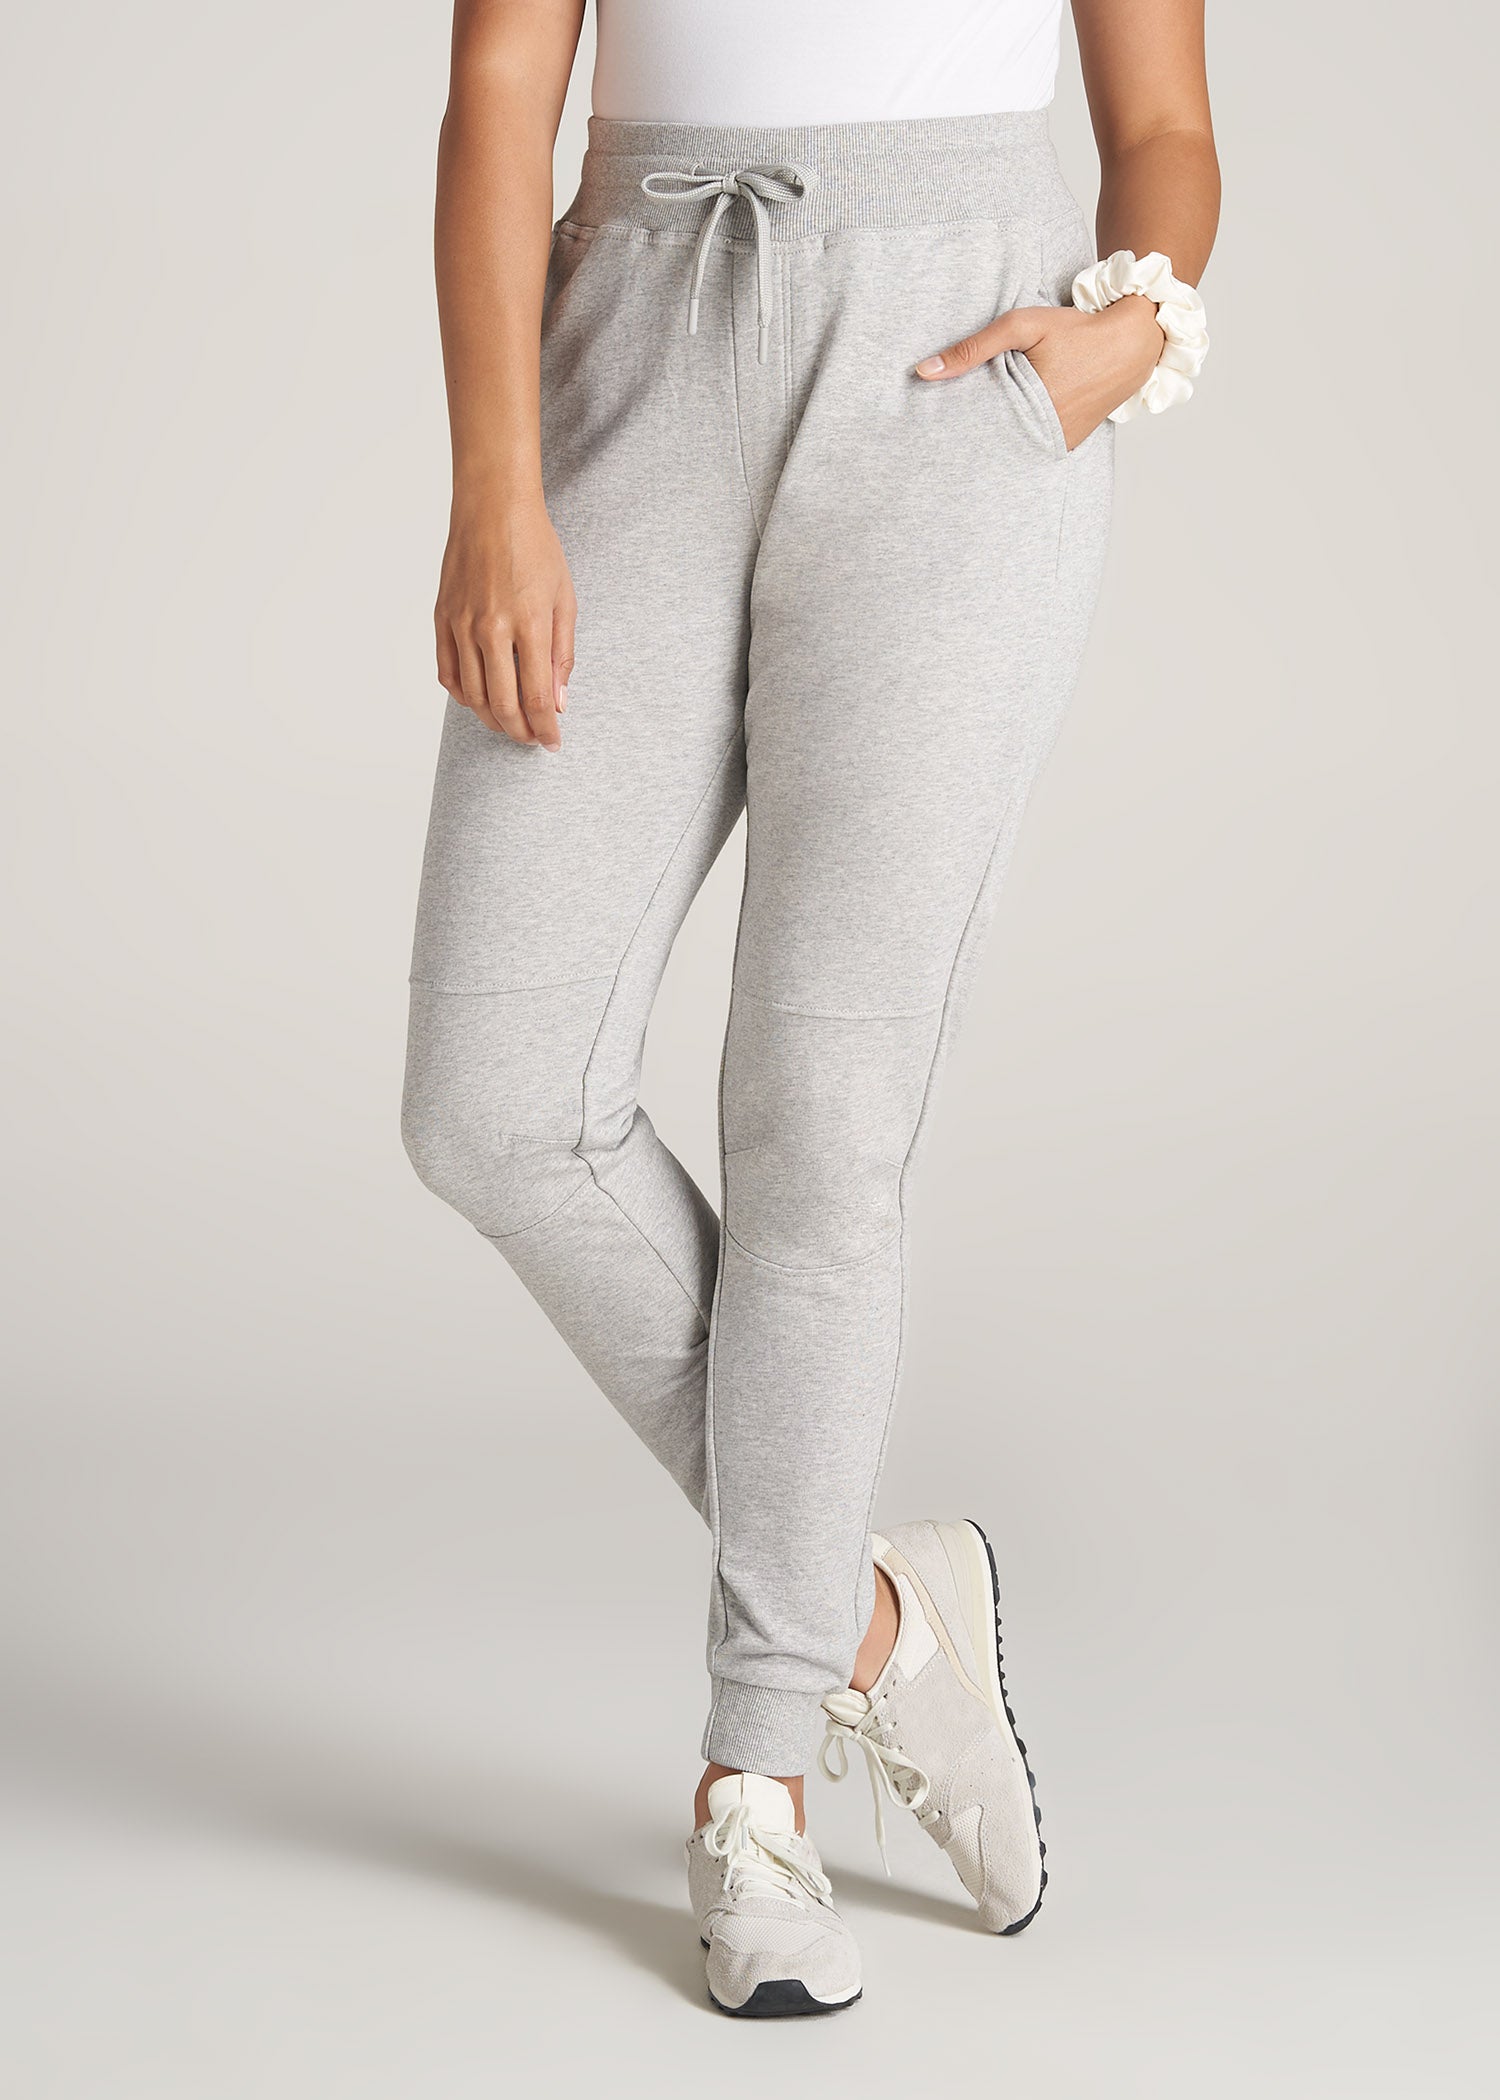    American-Tall-Women-FrenchTerry-Jogger-GreyMix-front